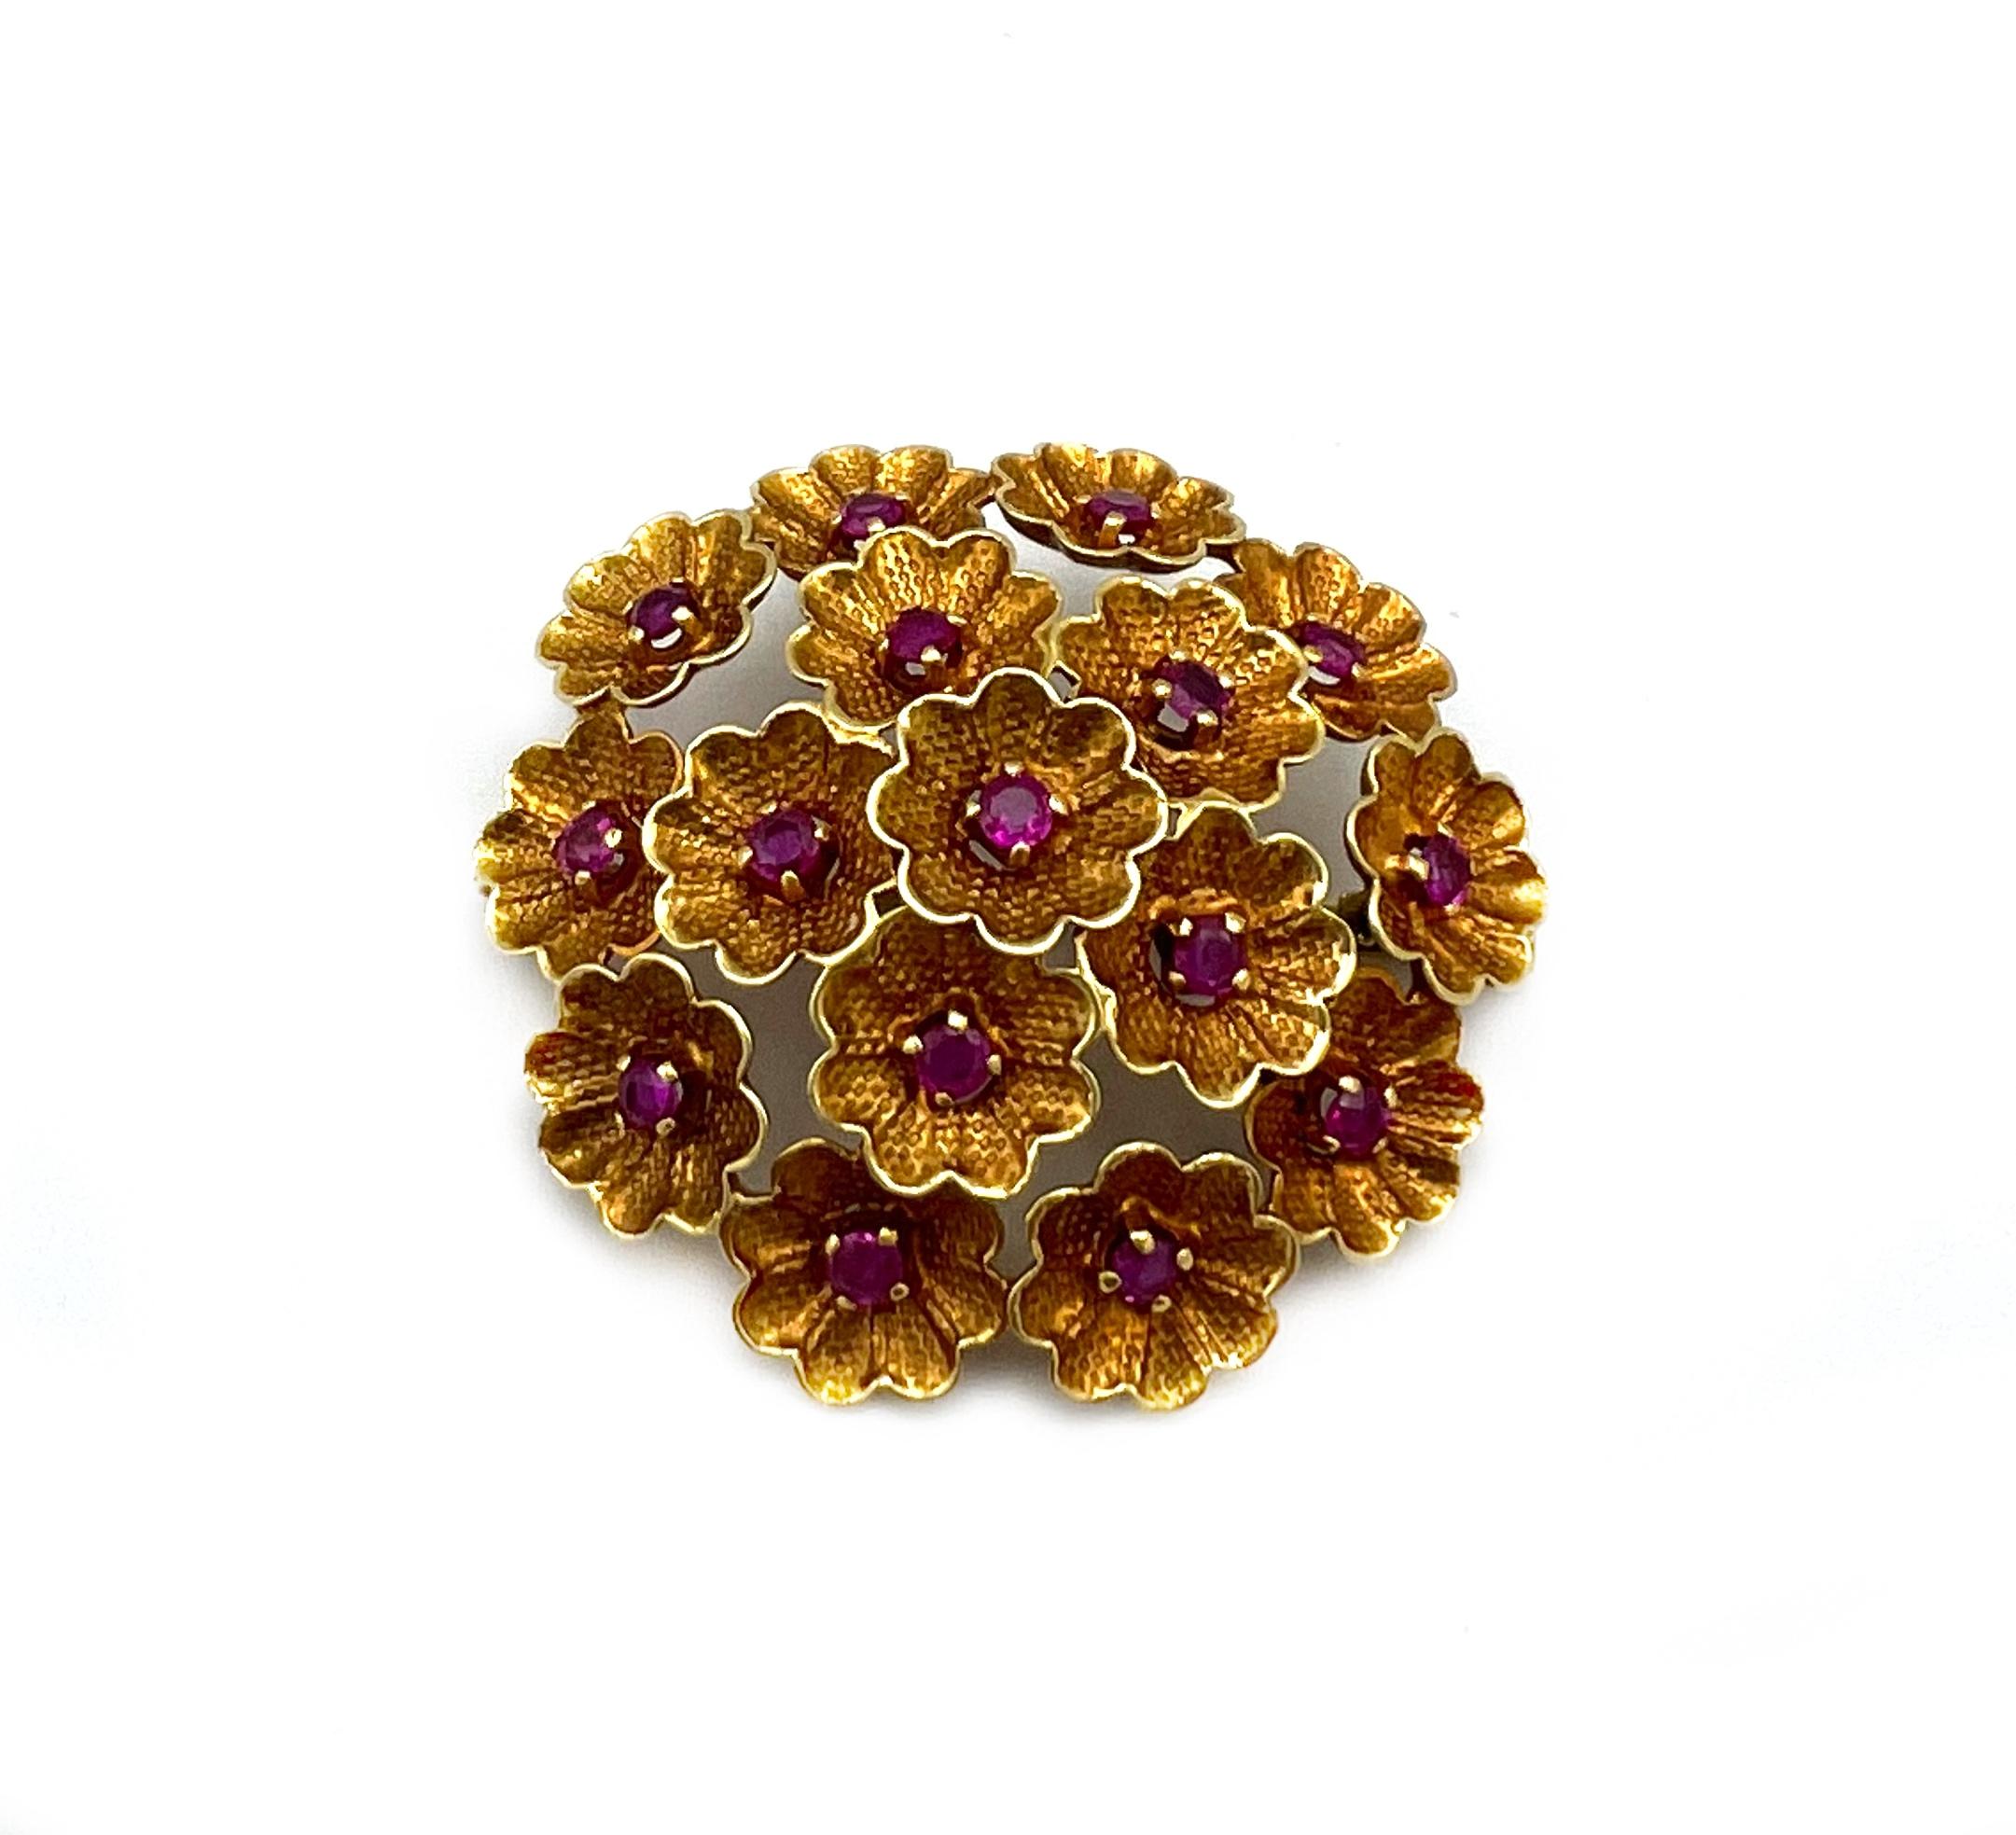 Product details:

The brooch is made out of 18K yellow gold and 0.8 carats of rubies, it features 3D floral motif. Made in Switzerland.

Hallmarks: Cartier Inc, 18Kts, Swiss.
Measurements: 1.25” diameter.
Weight: 8.2 grams.
